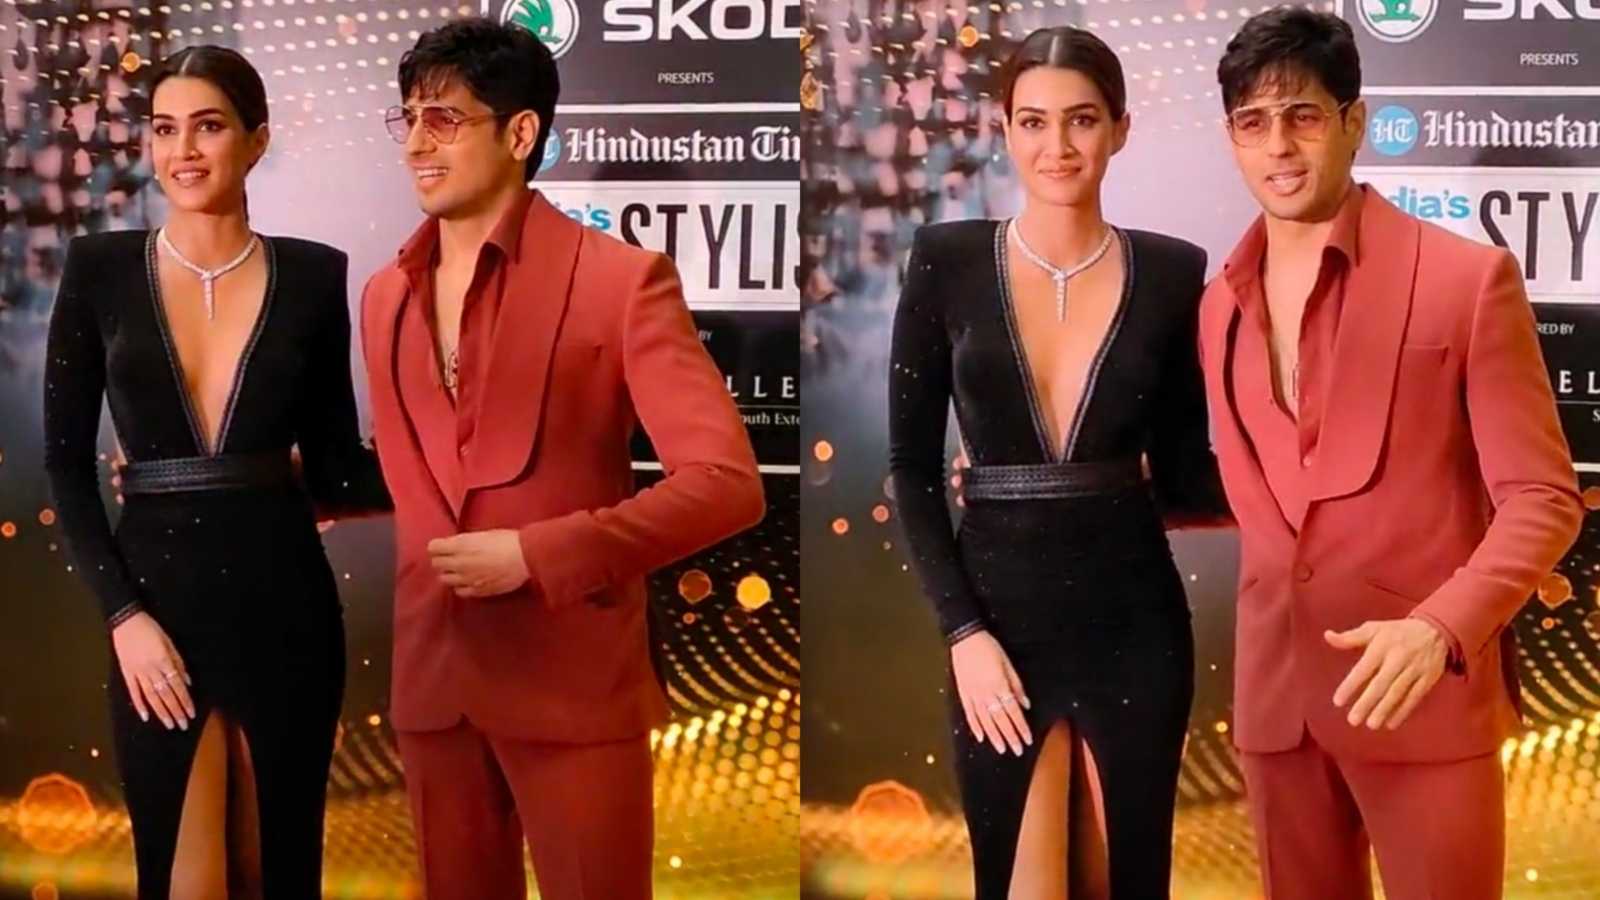 Sidharth Malhotra and Kriti Sanon's 'red carpet only' friendship has a whole fan base; SidRiti shippers now want more